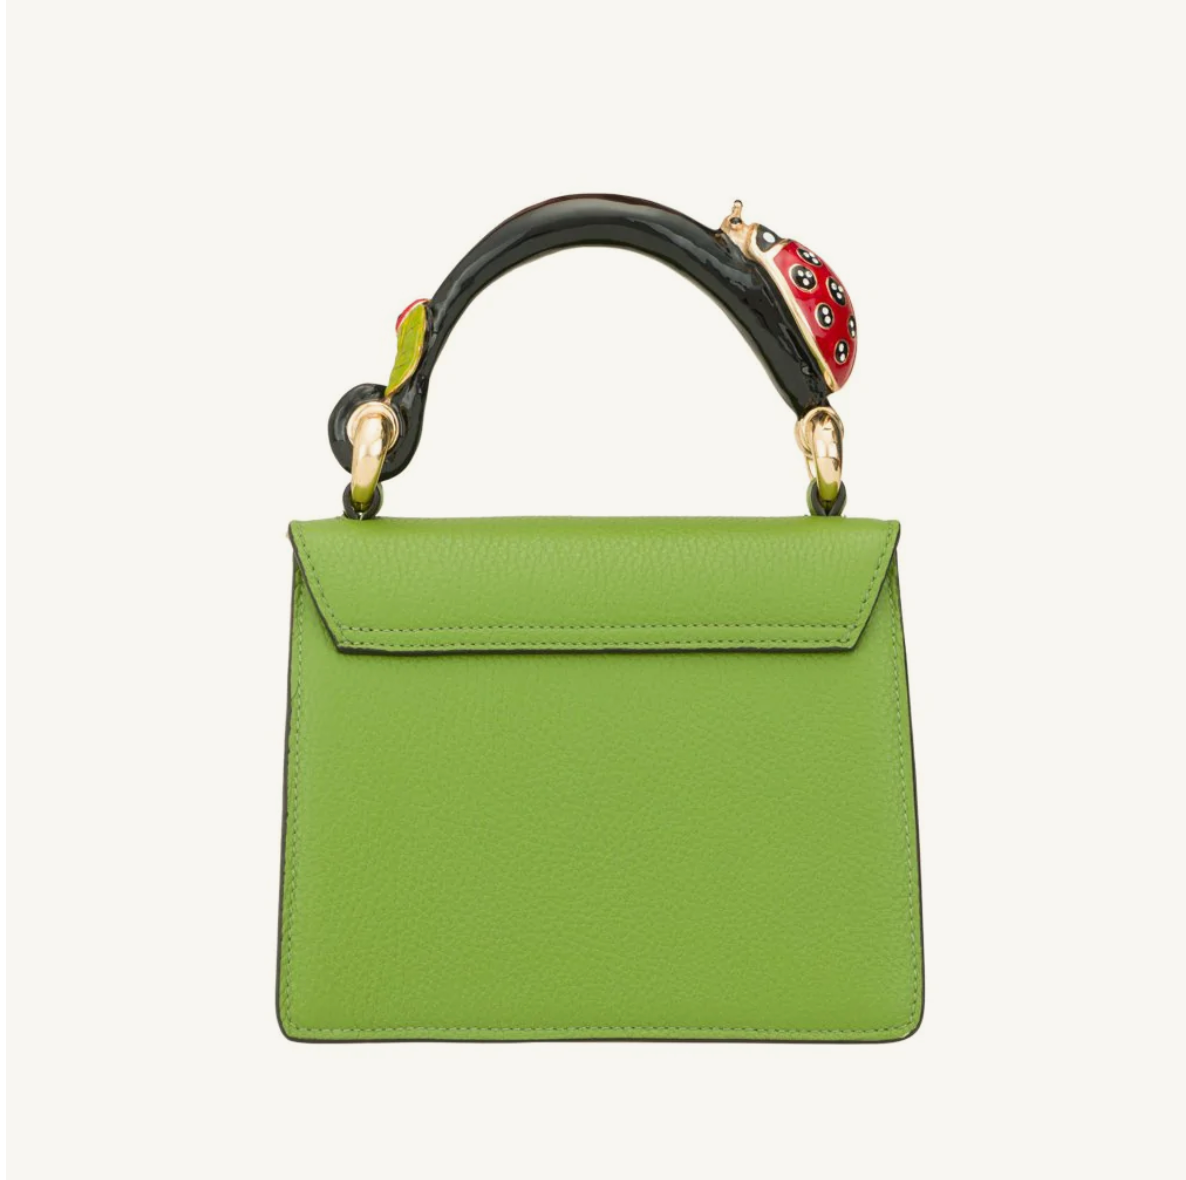 Coccinella is a rare handmade bag from Italy. At Via Napolis we showcase only Italian luxury handbags.